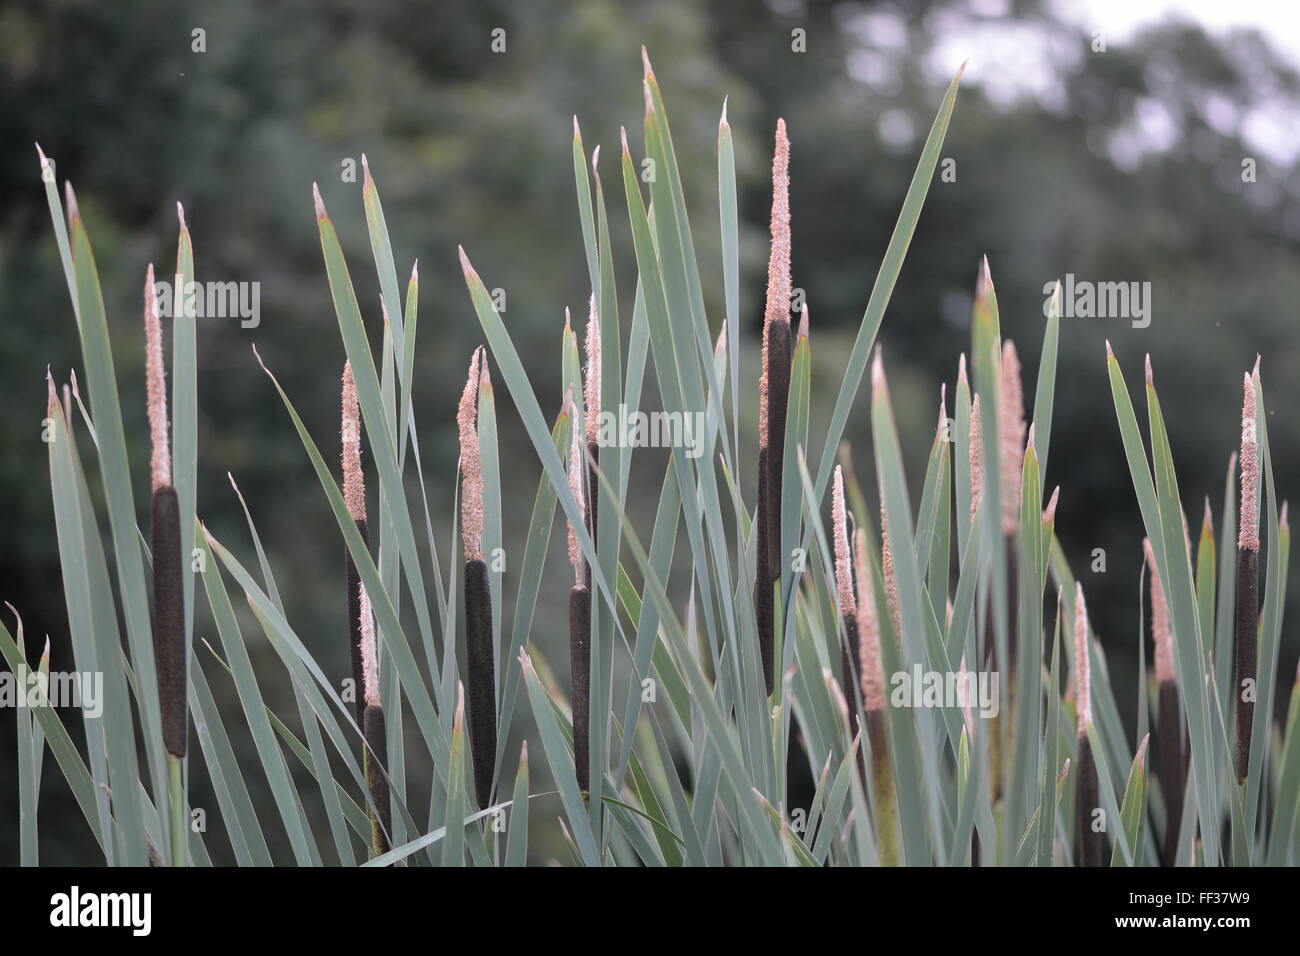 Bulrush (Typha latifolia). Rushes in the family Typhaceae, in flower showing flower spikes with staminate and pistilate flowers Stock Photo